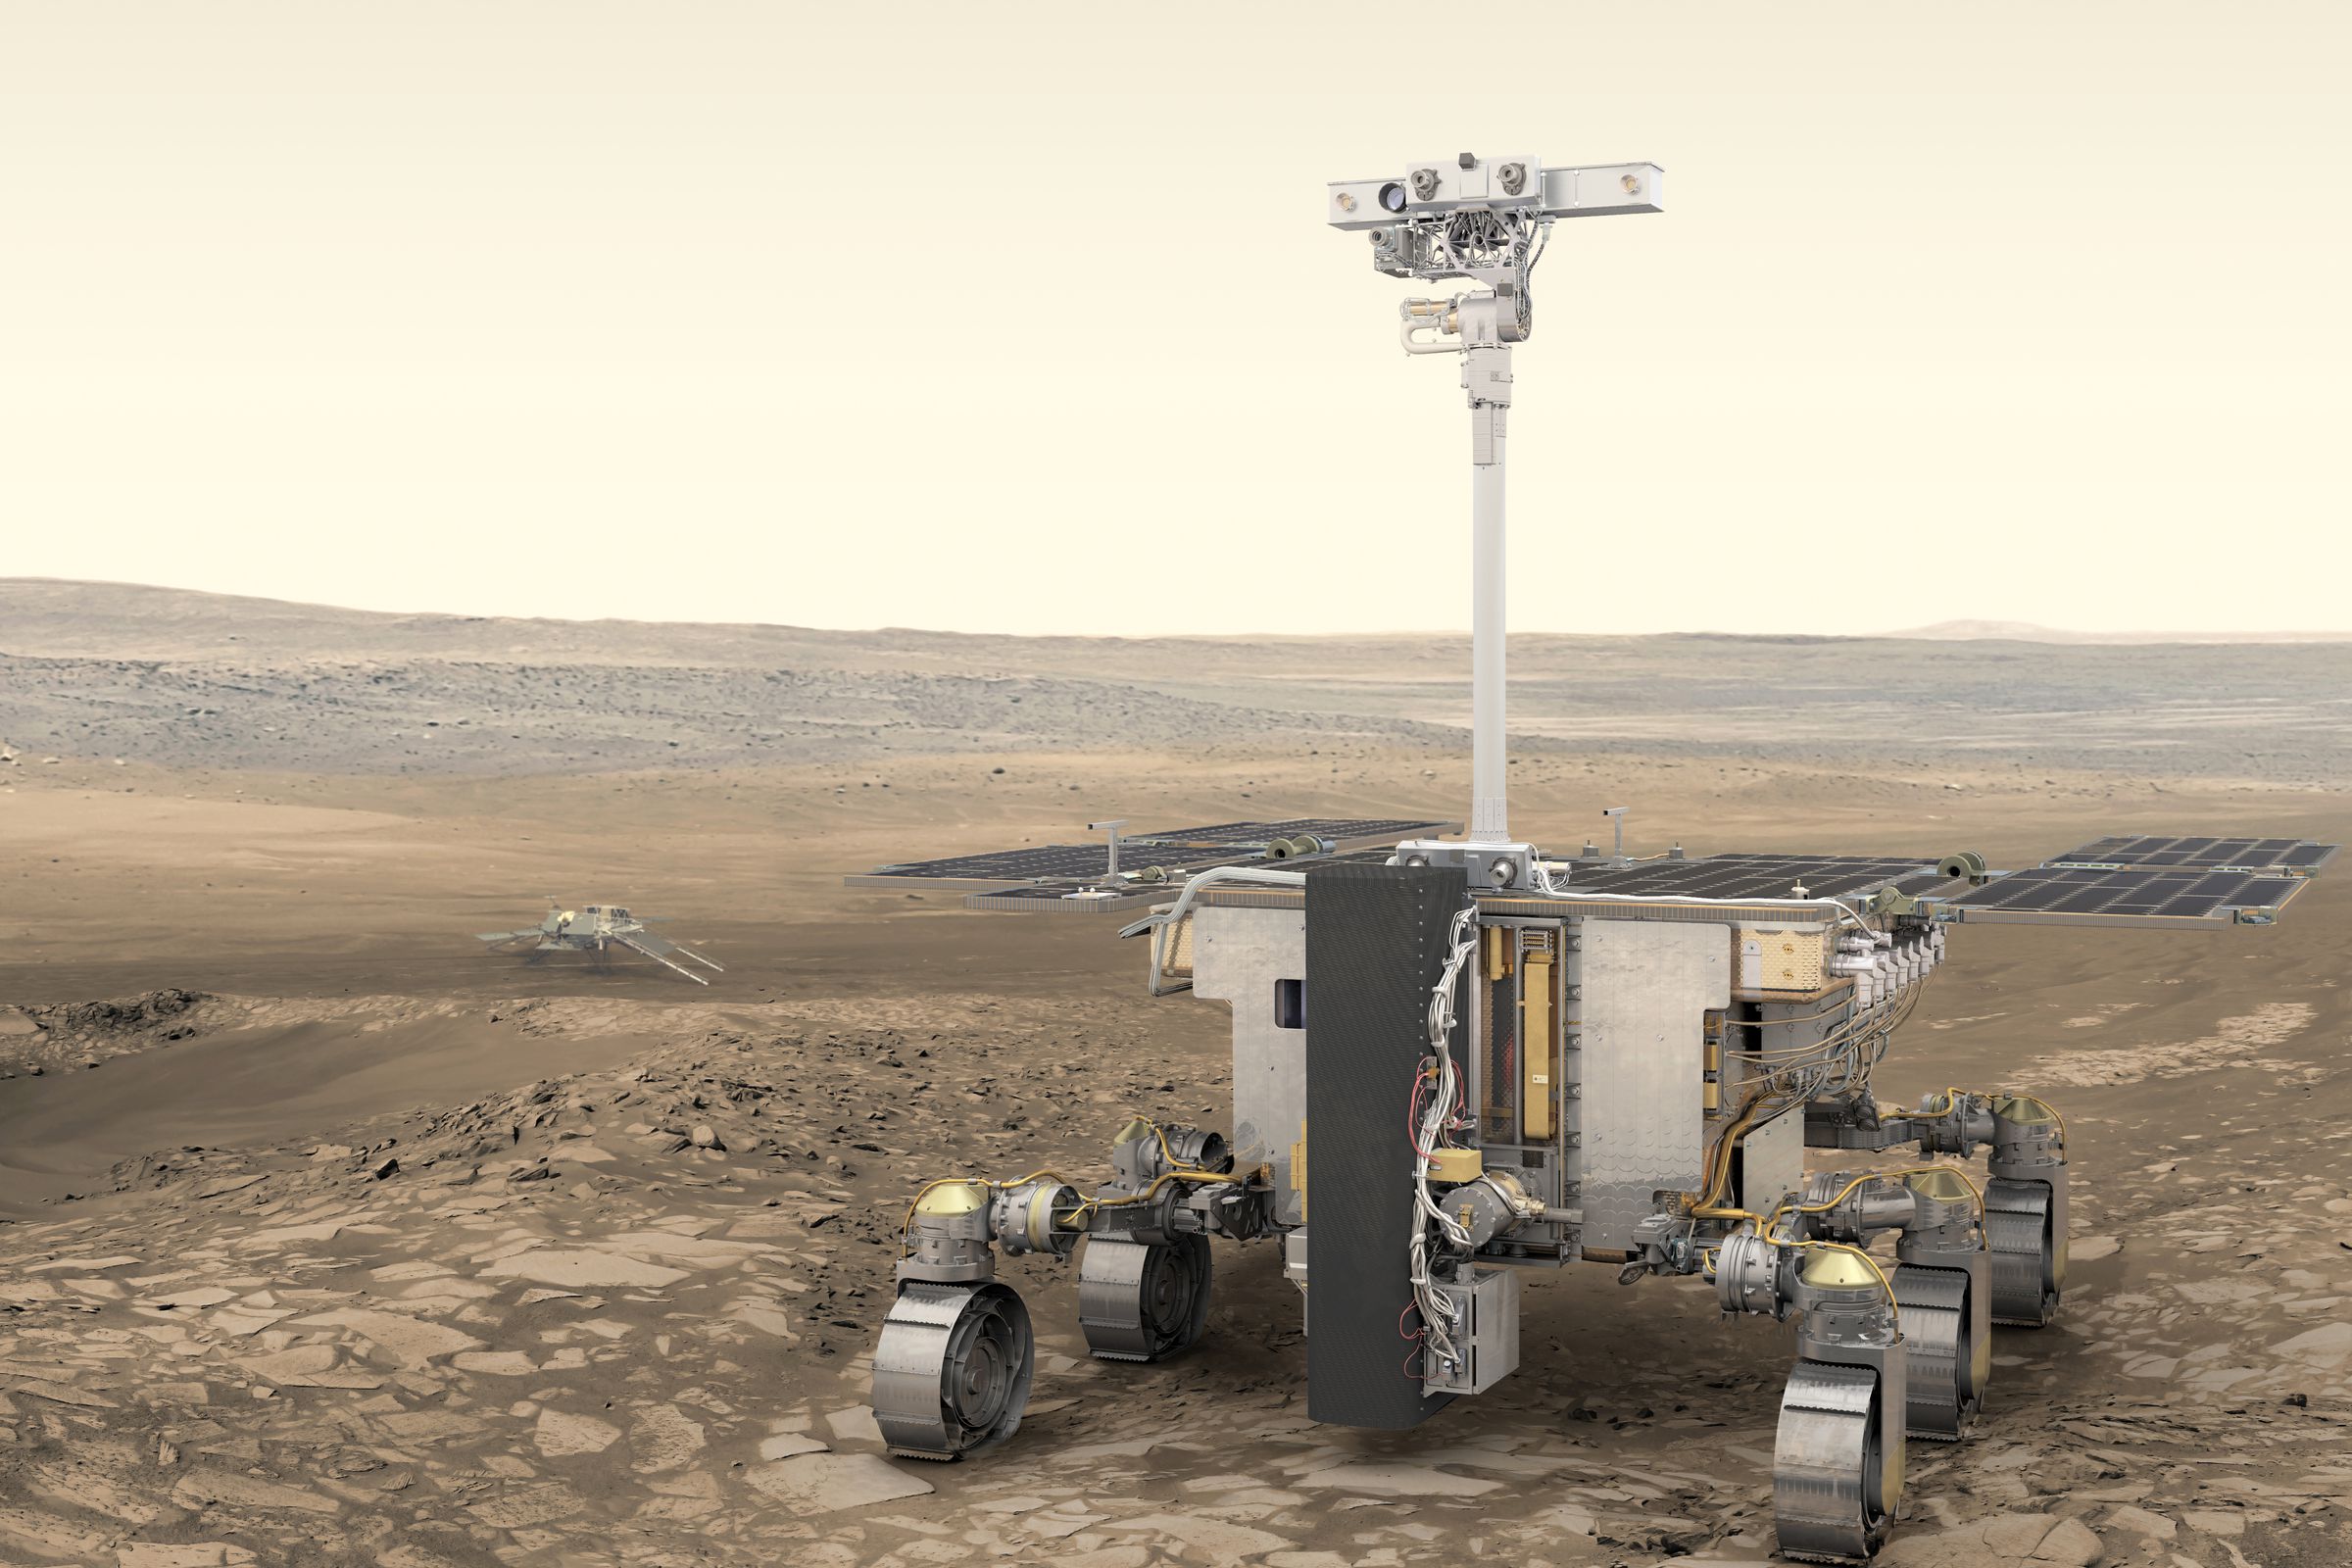 An artistic rendering of the Rosalind Franklin rover on Mars.